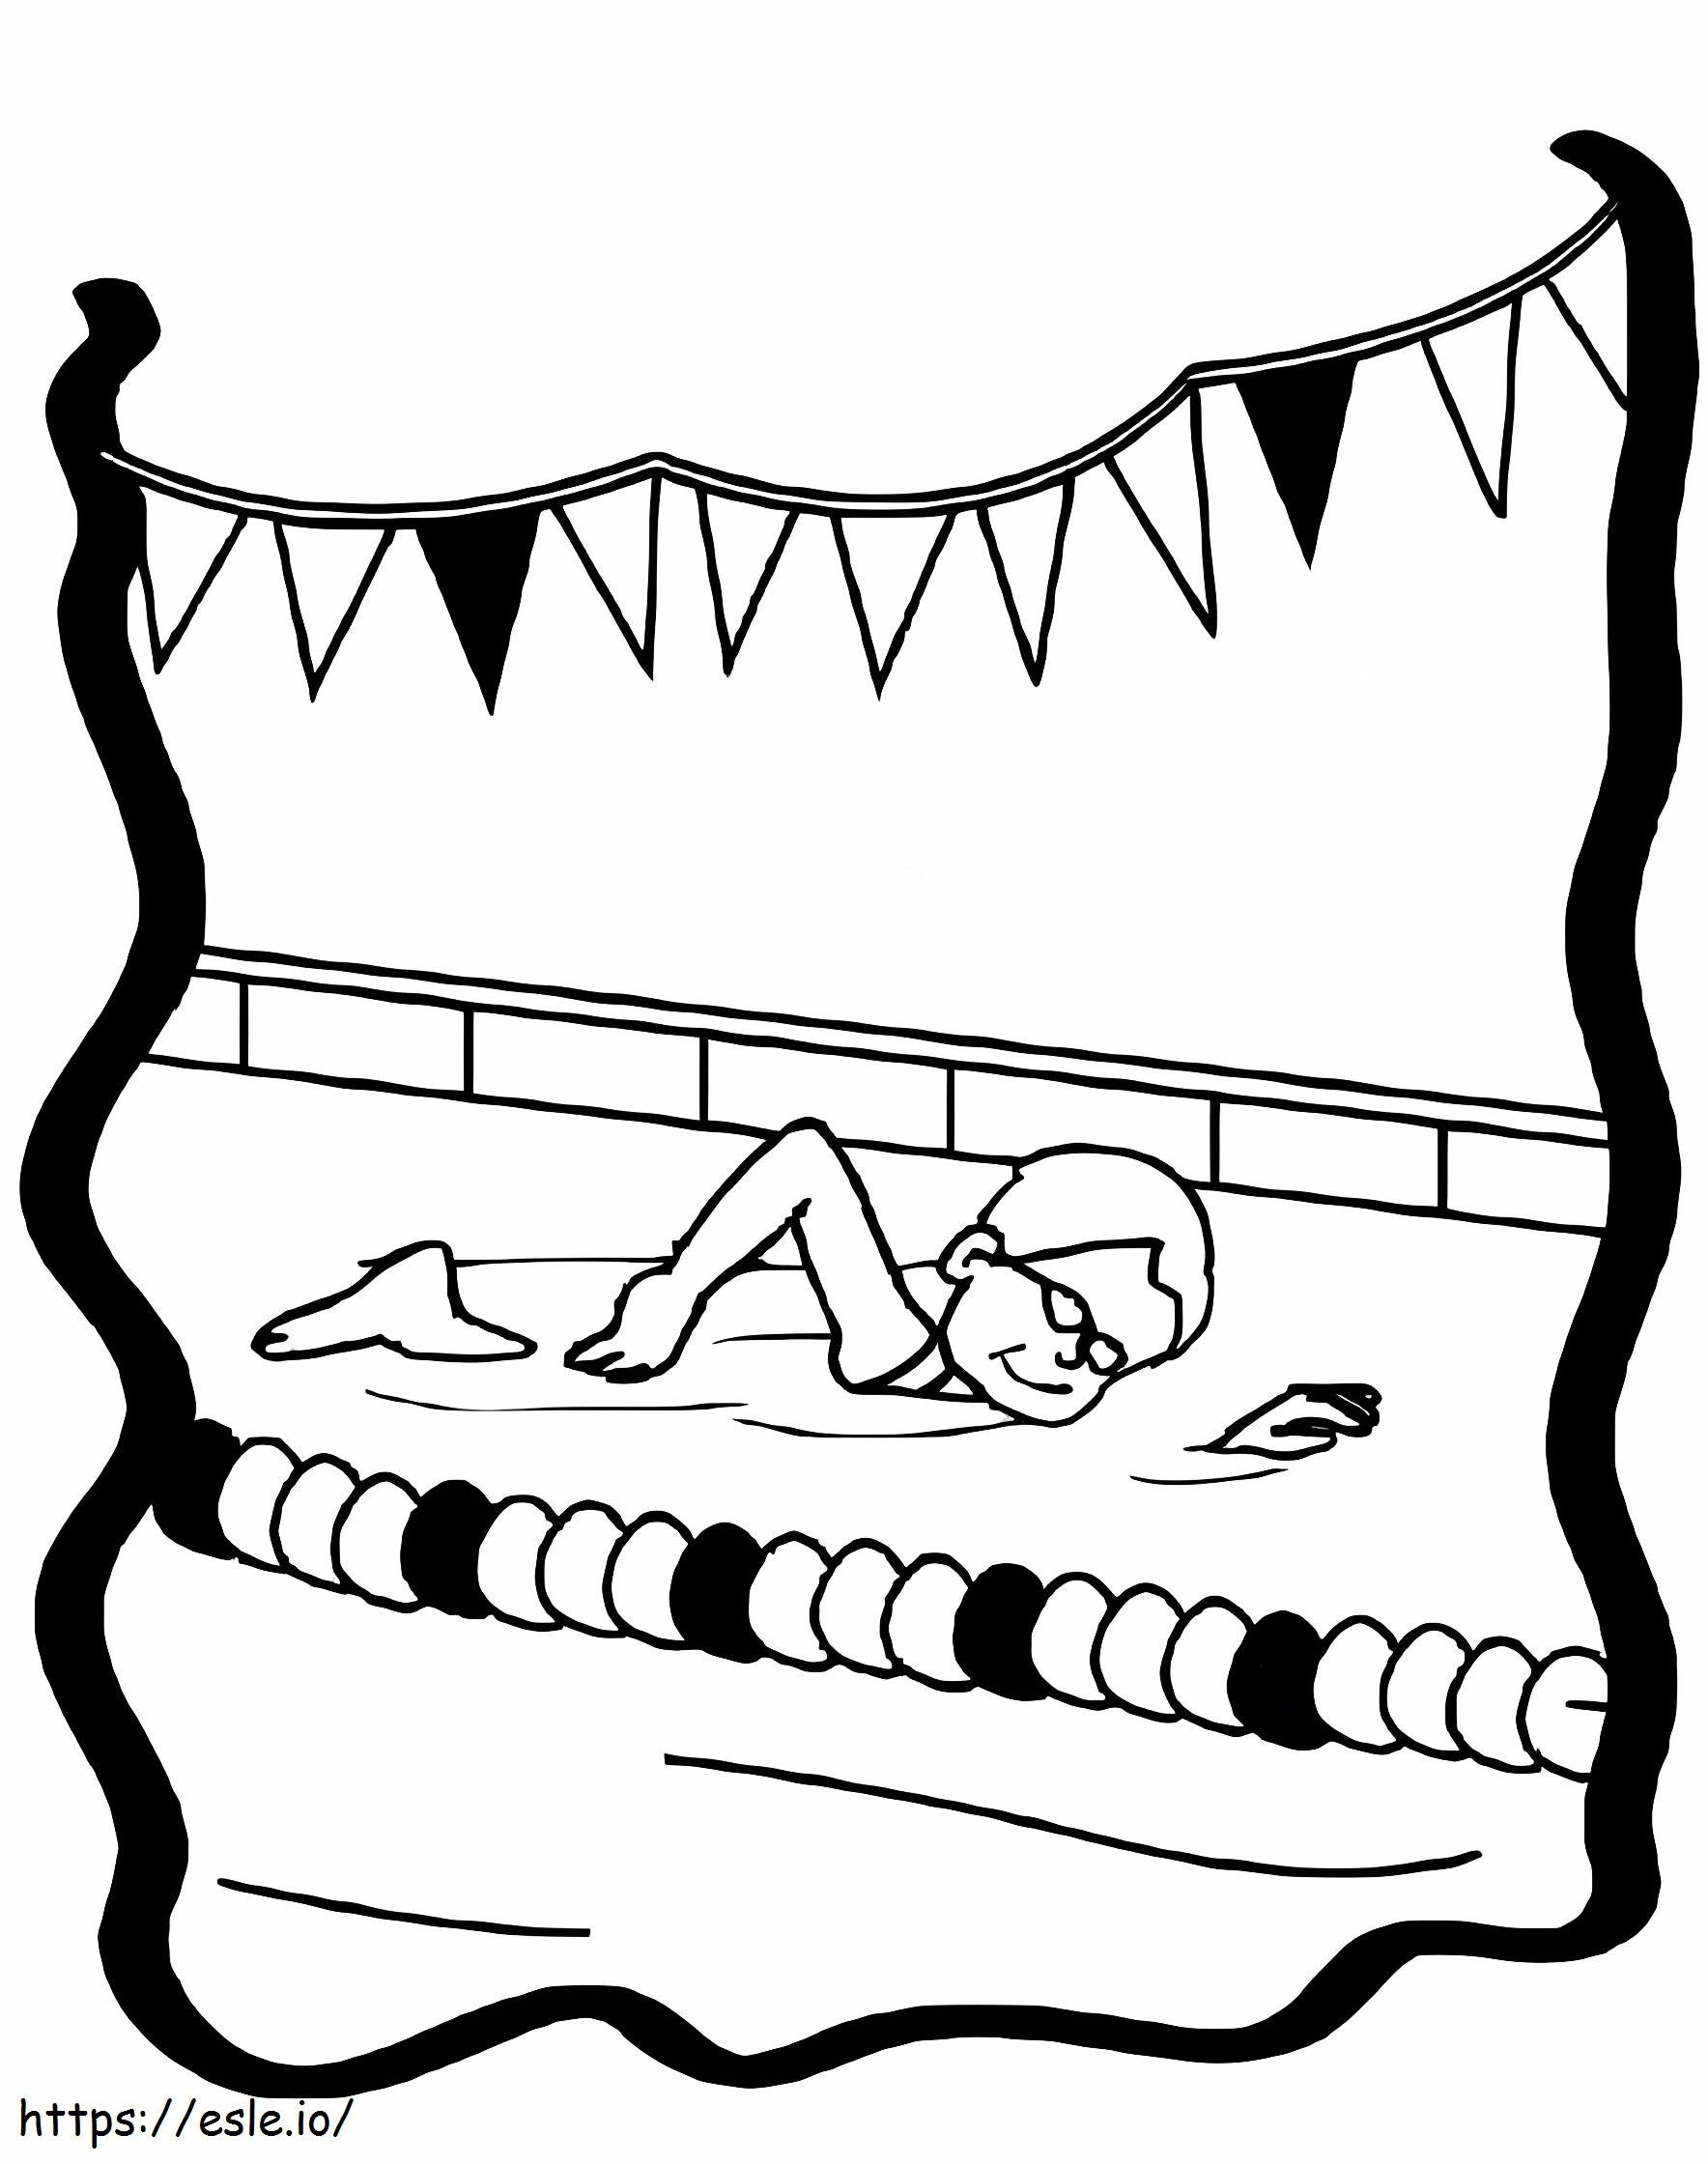 The Swimming Meet coloring page